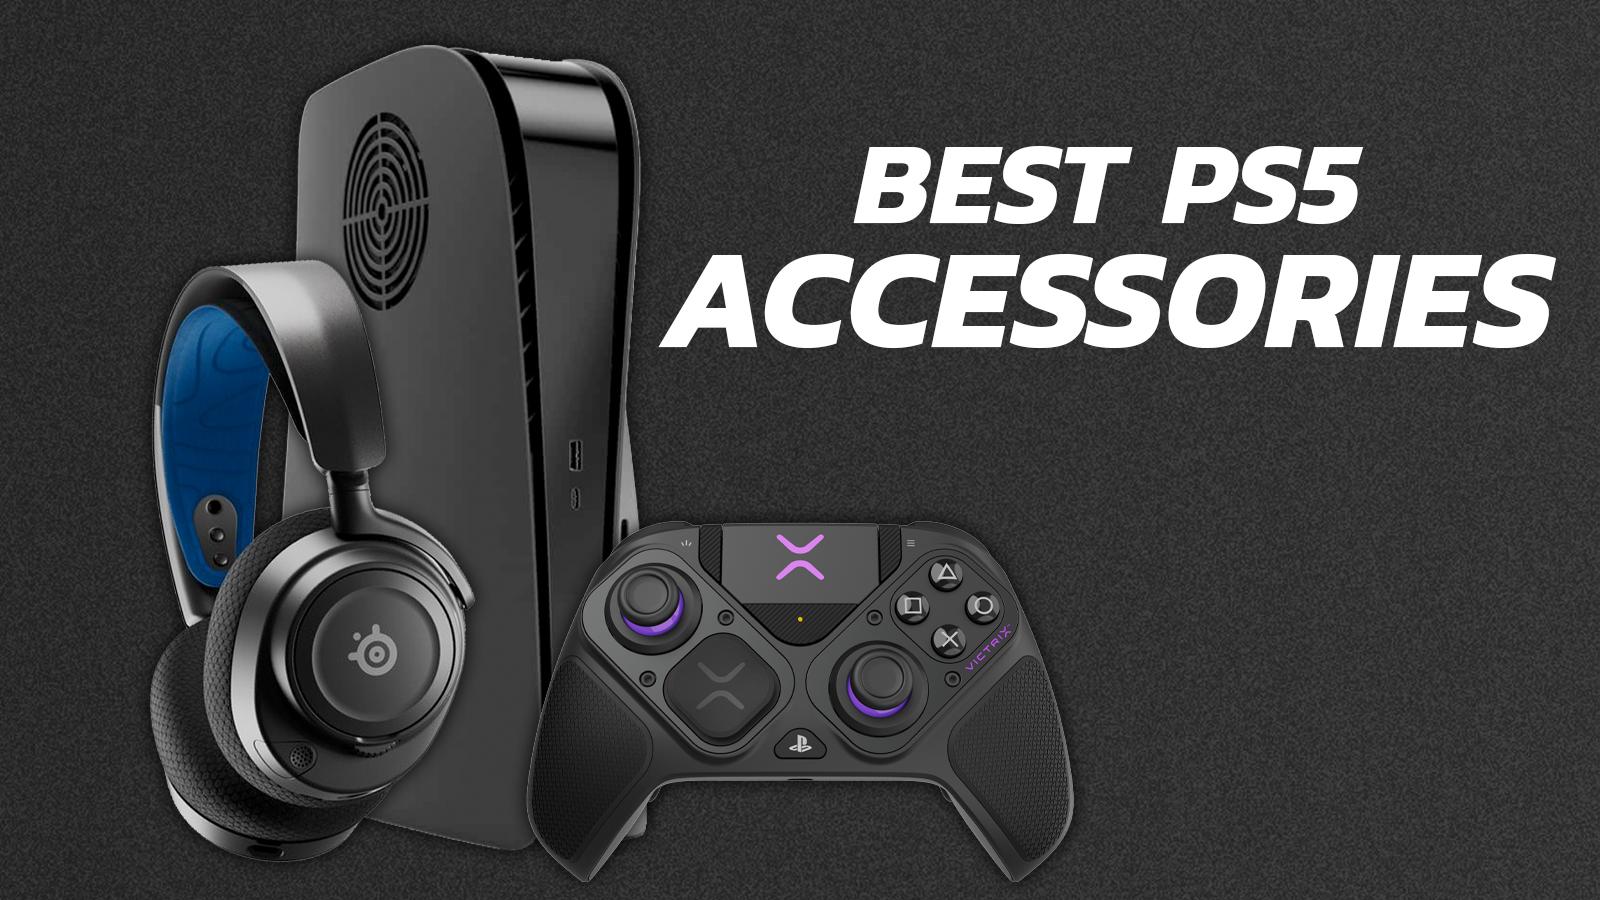 Best PS5 accessories for 2022 - The Verge